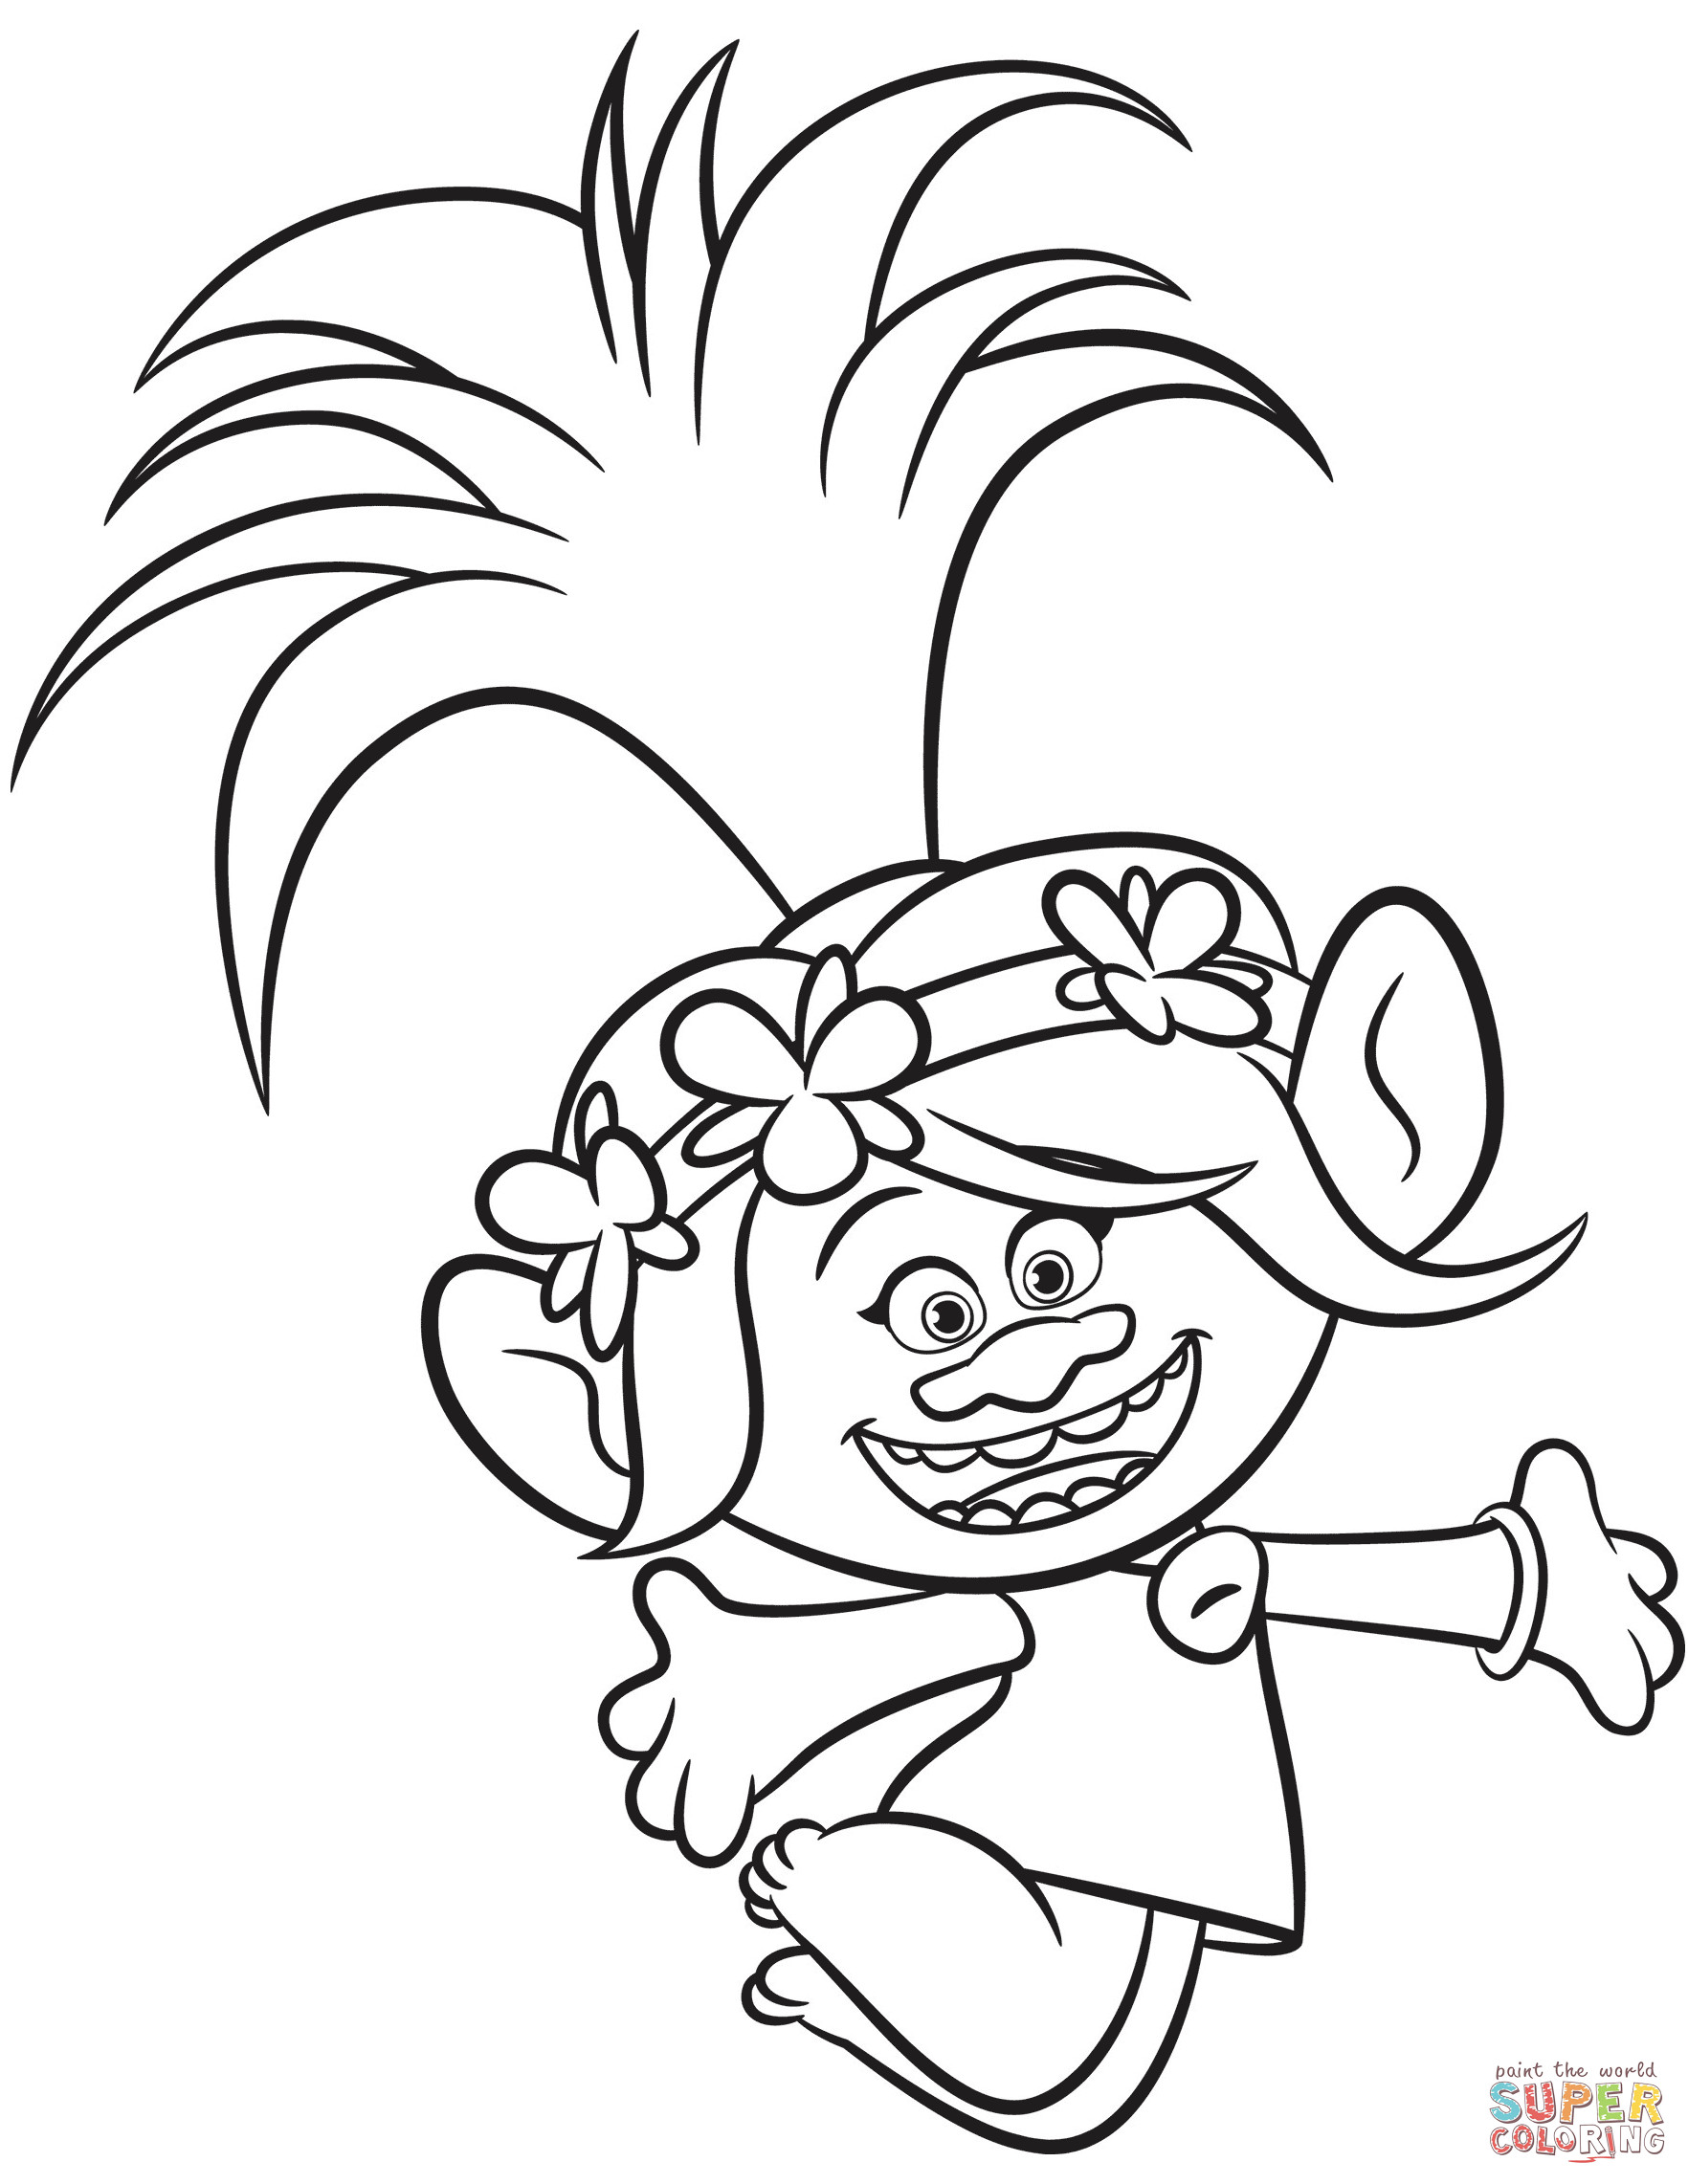 Trolls Printable Coloring Pages
 Poppy from Trolls coloring page